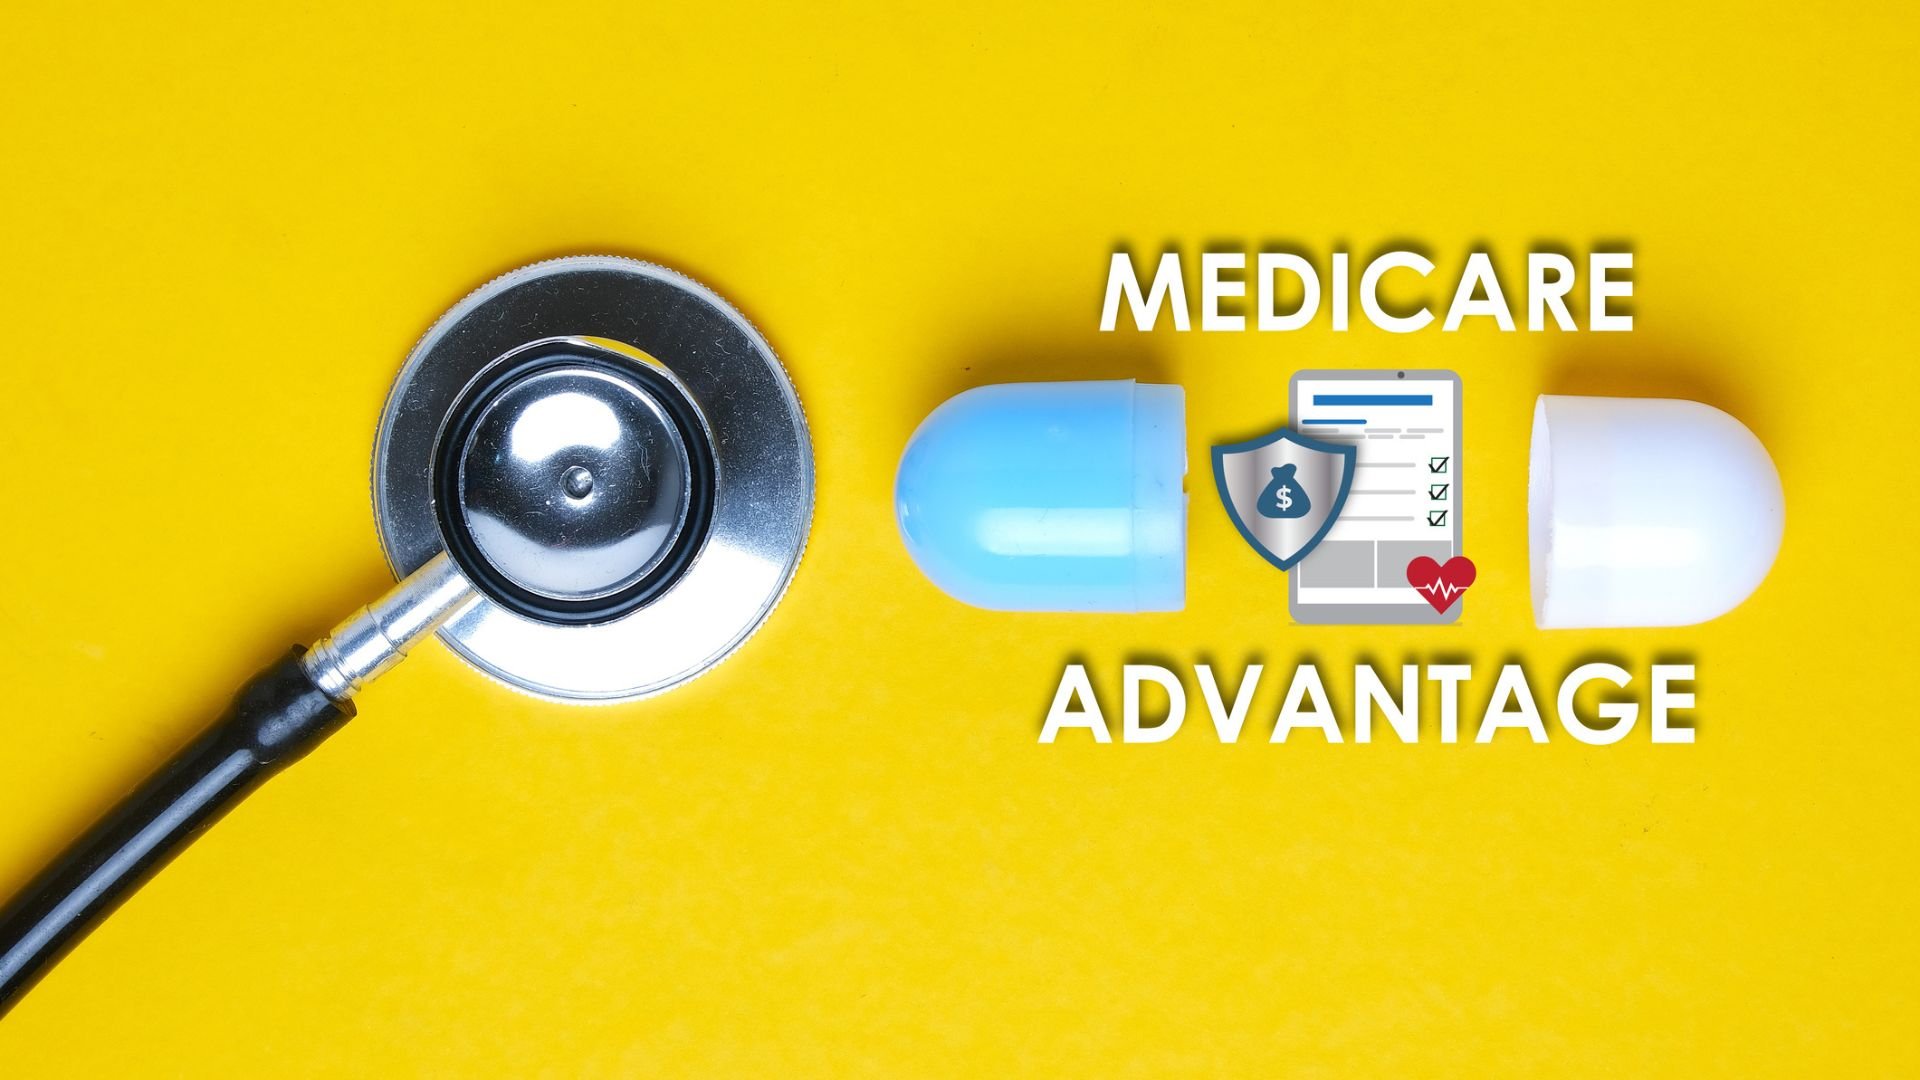 Medicare Advantage stock image with pill